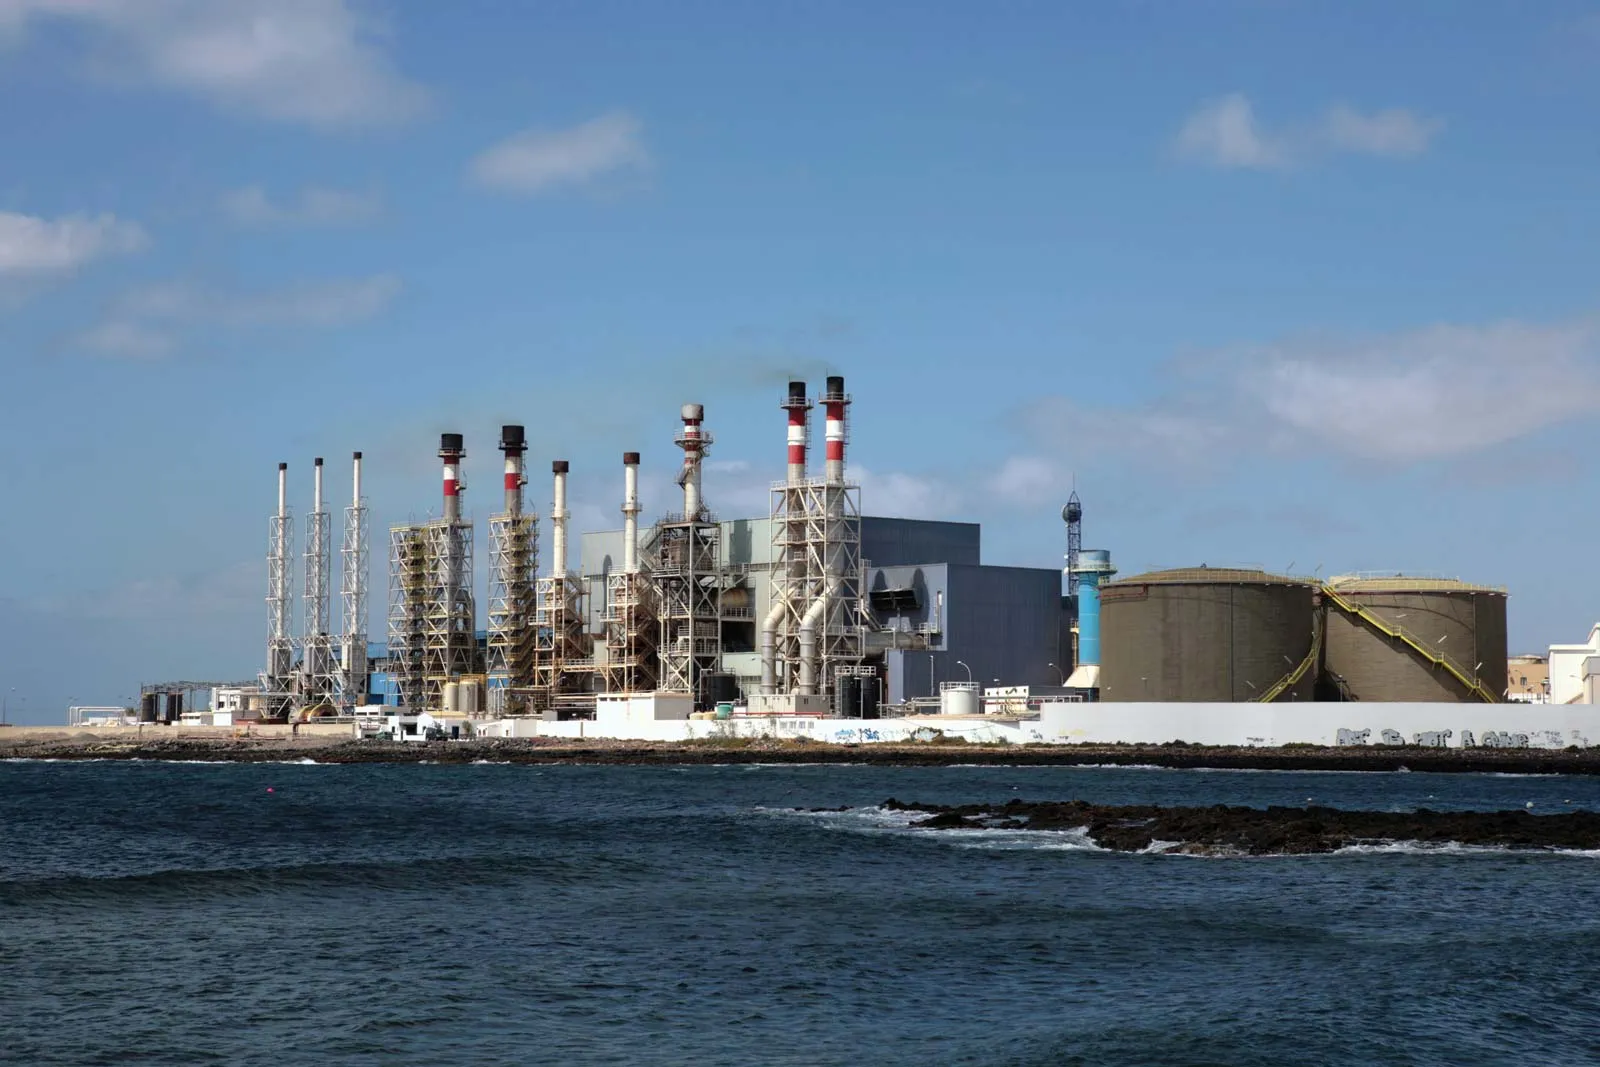 Morocco speeds up desalination projects as drought persists